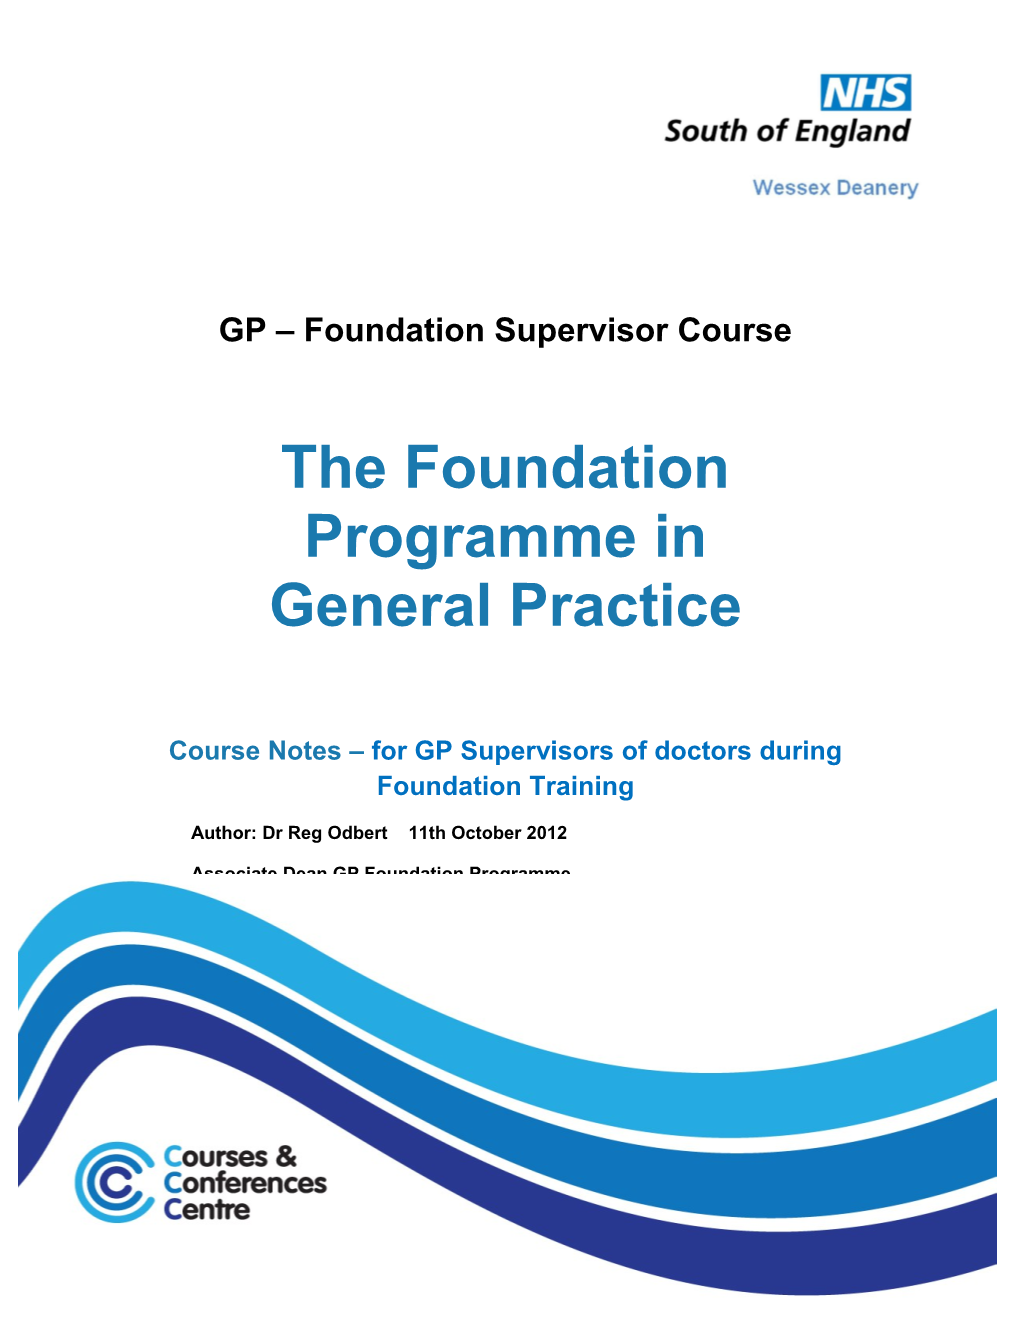 Aims of Foundation Placement in GP